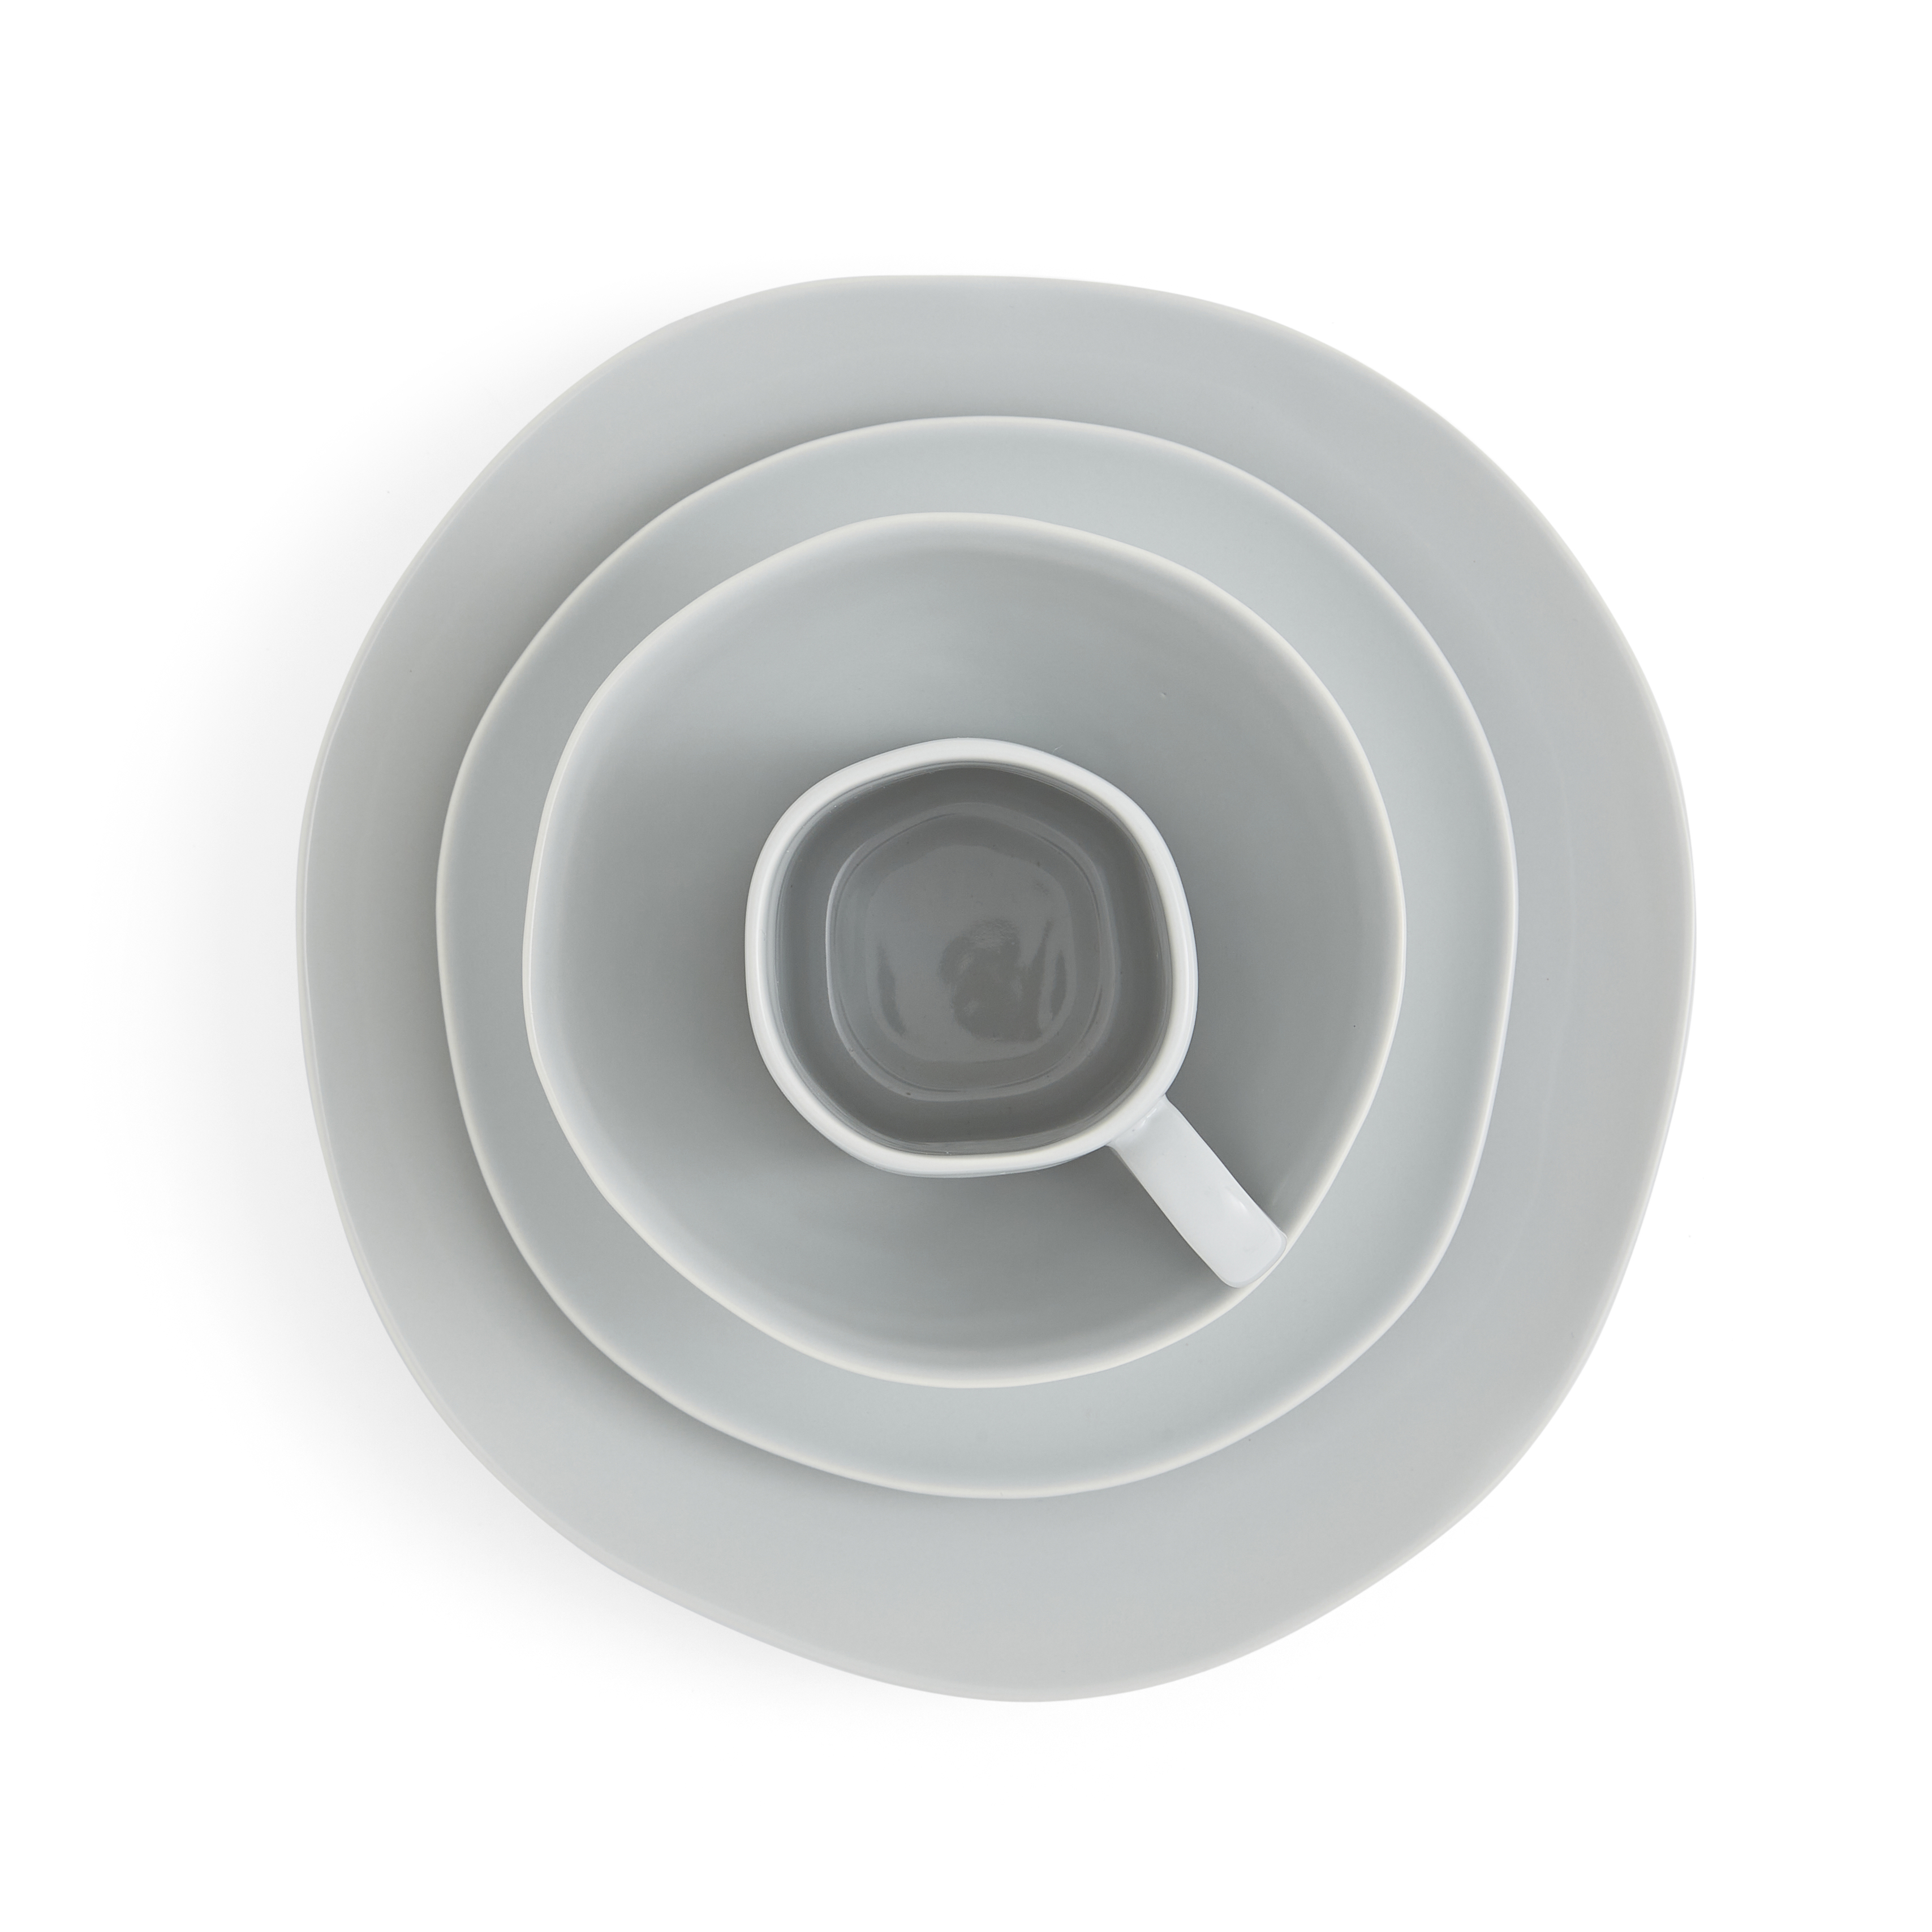 Sophie Conran Arbor 4 Piece Place Setting, Dove Grey image number null